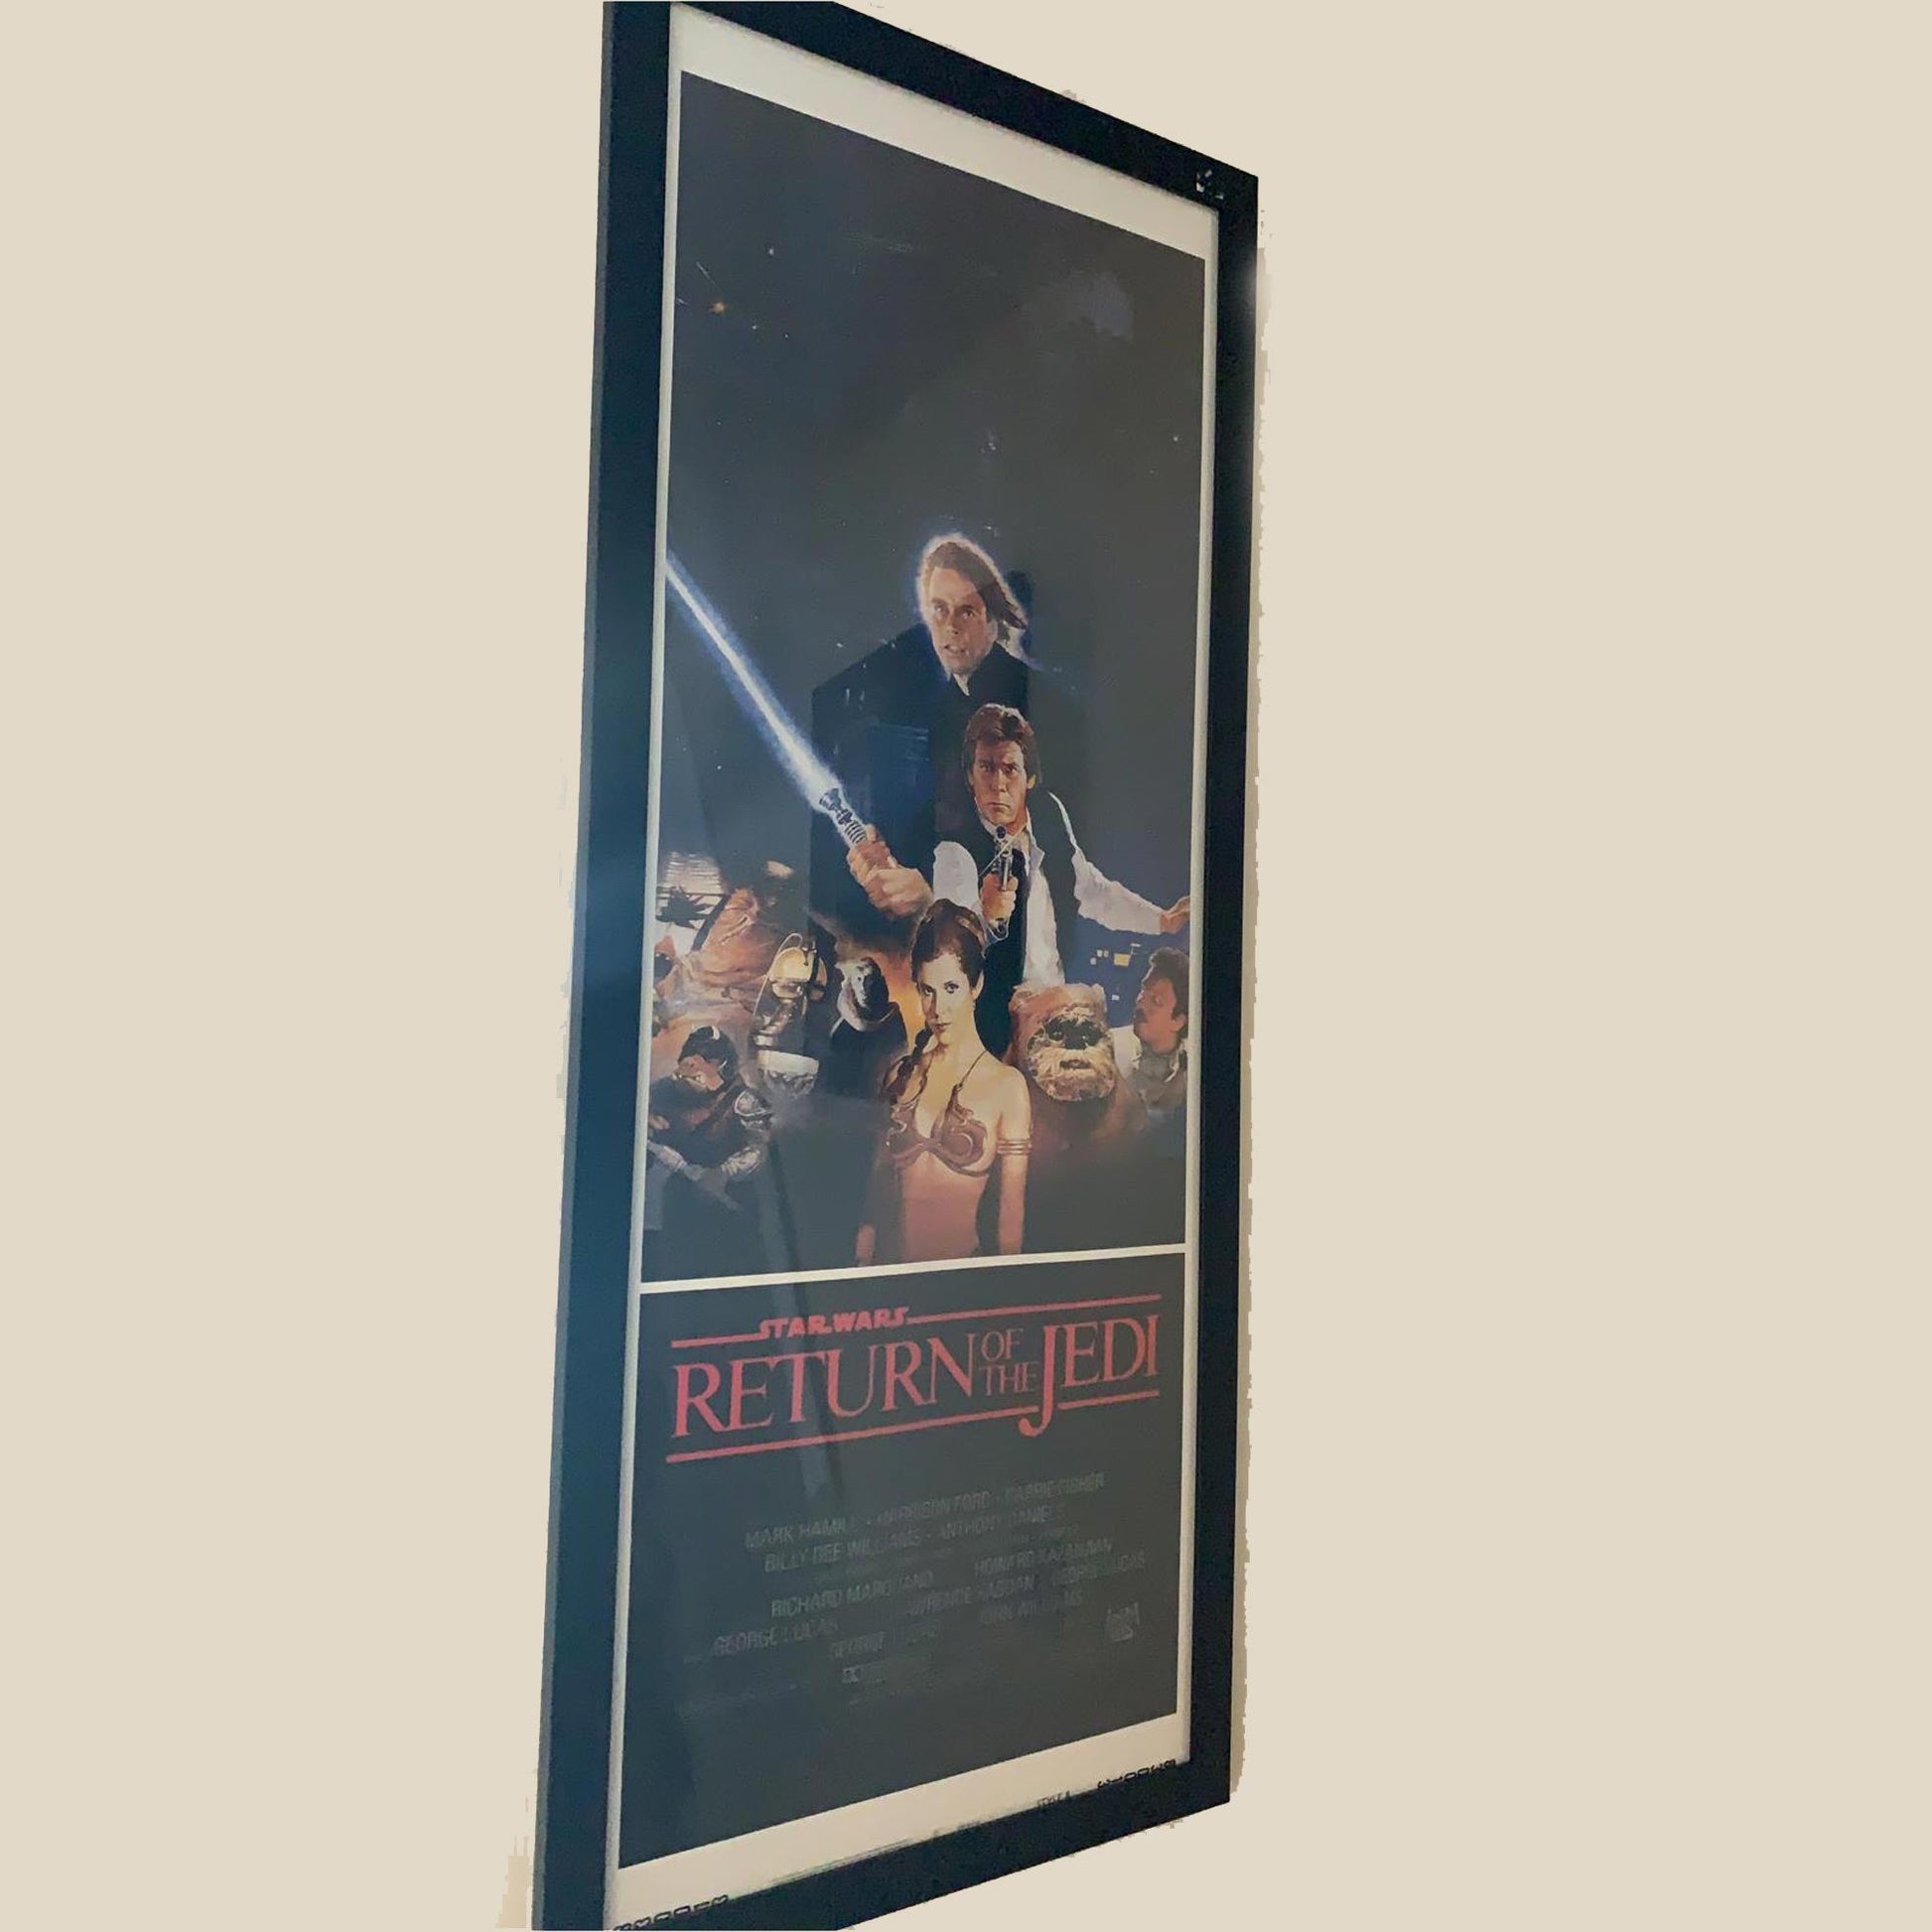 Return of the Jedi Limited Edition with Signatures Collectable Memorabilia Frame